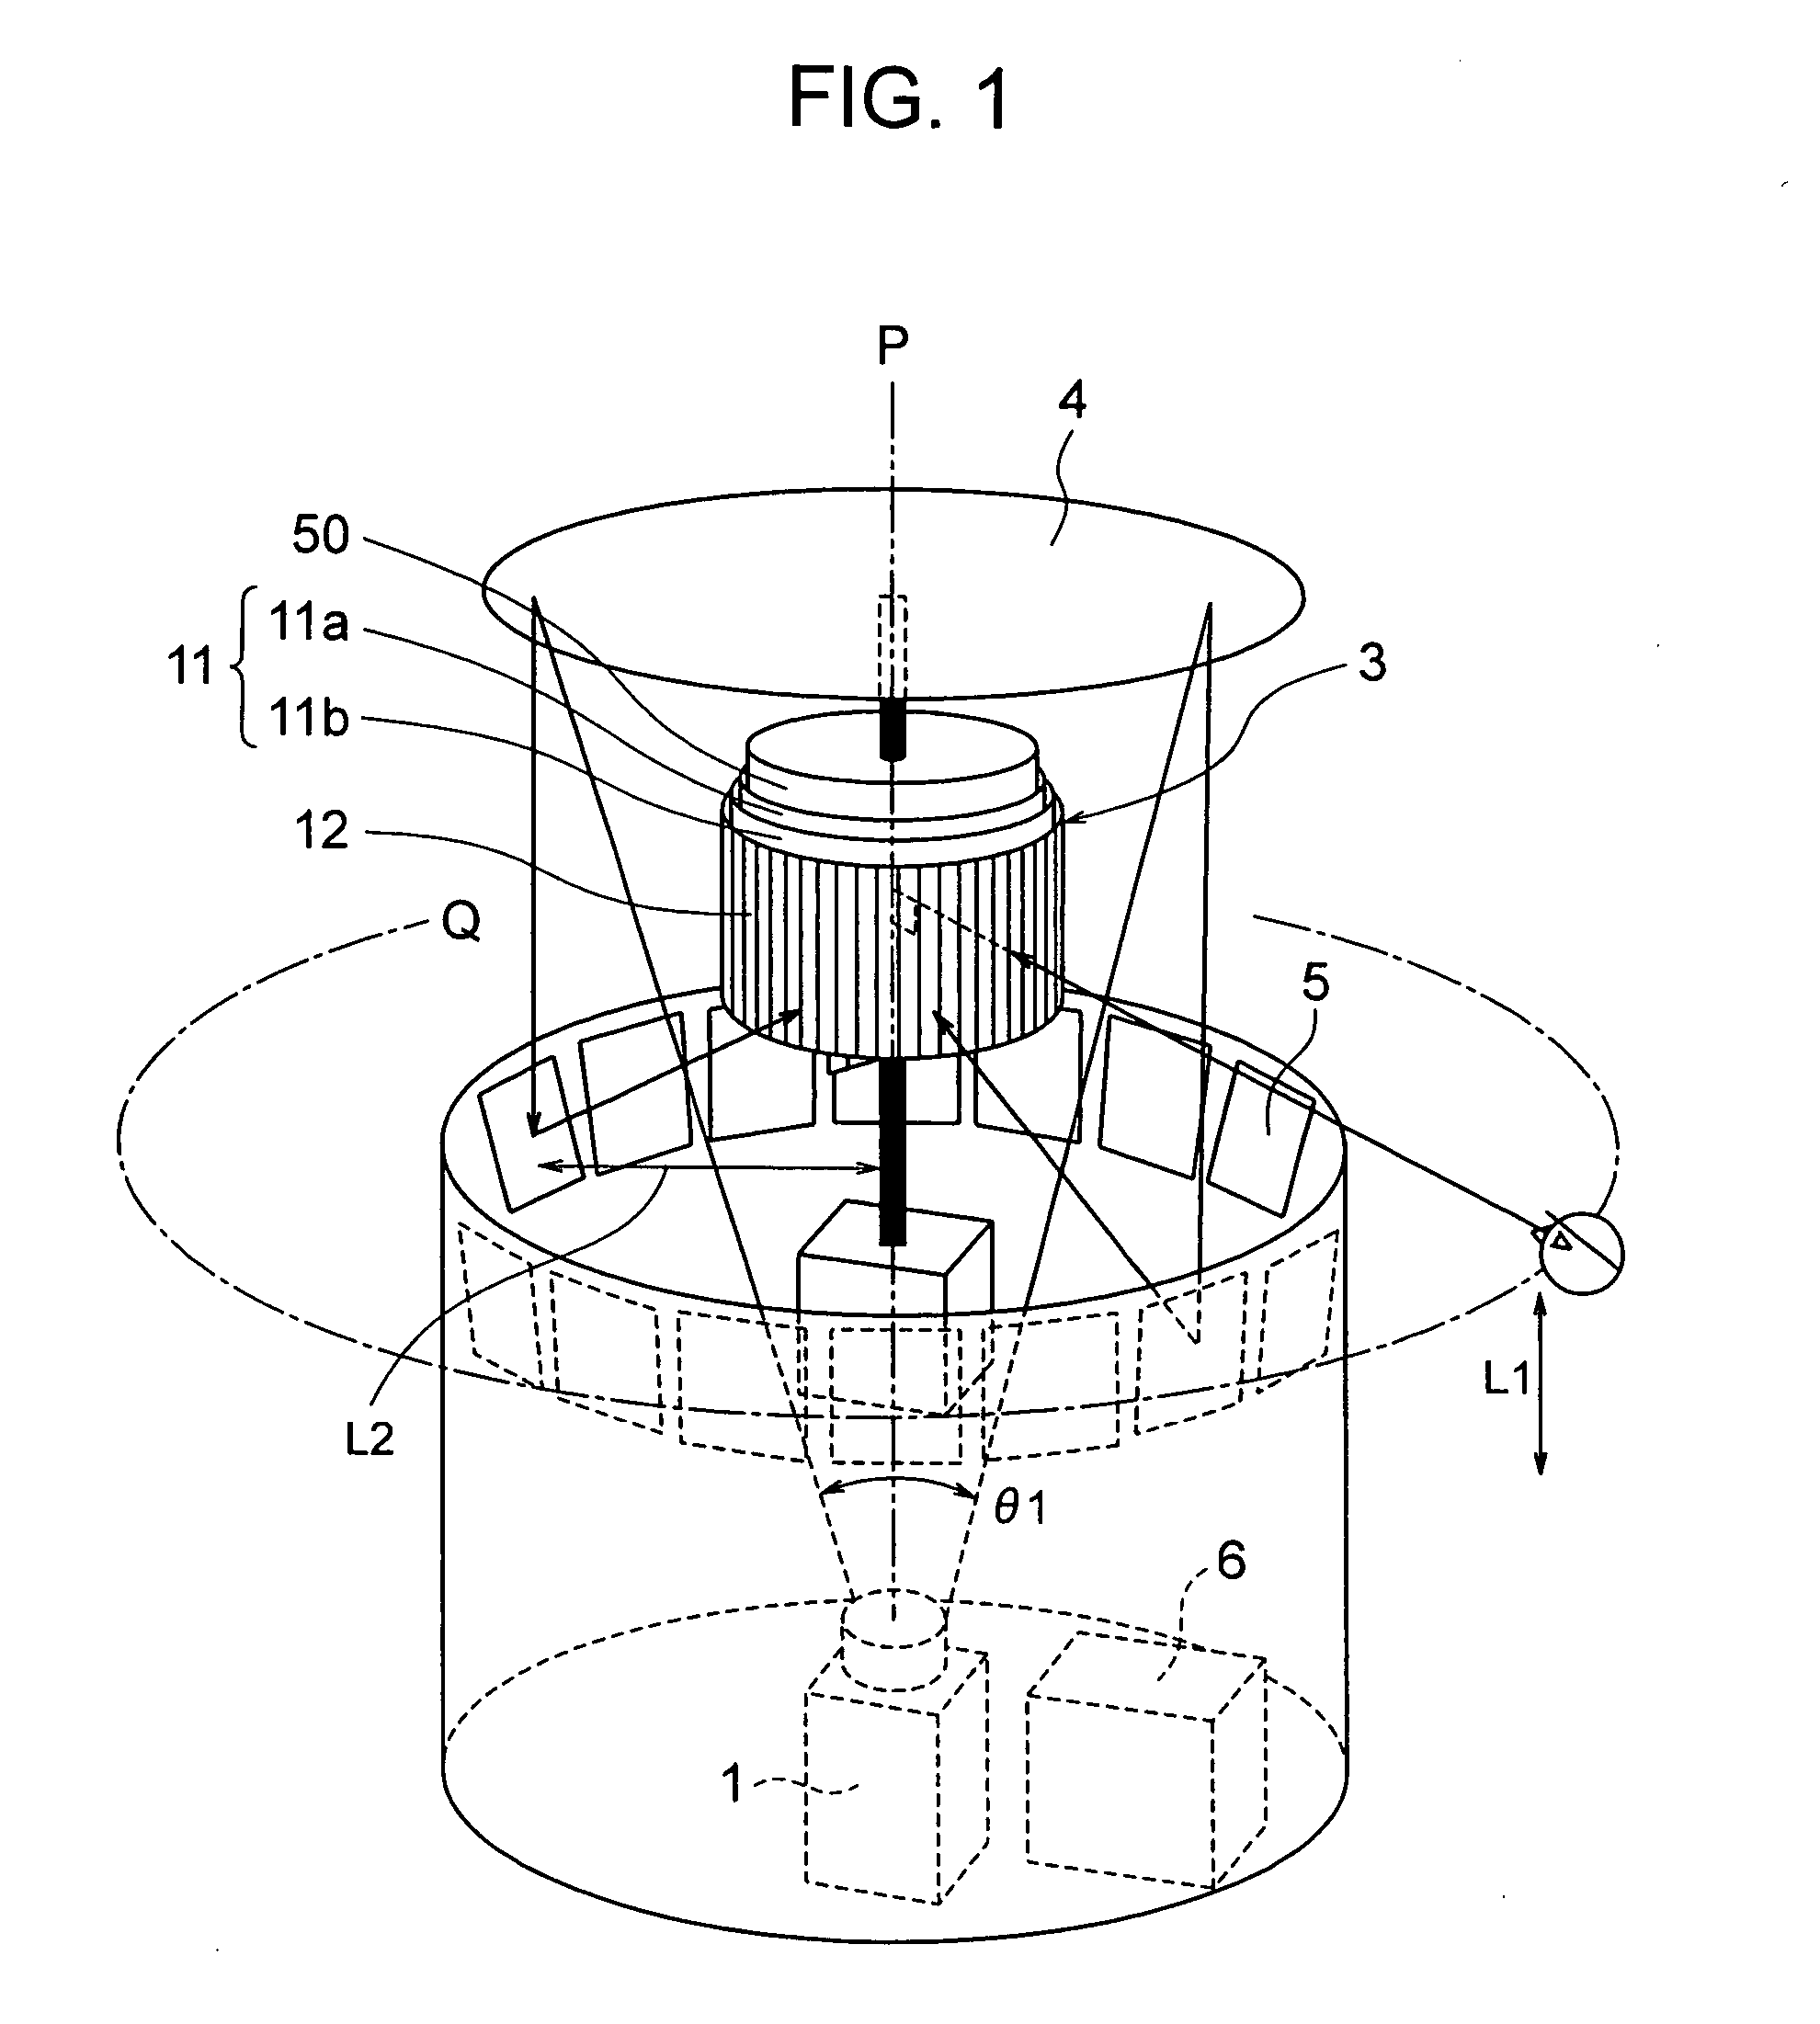 Display System and Camera System